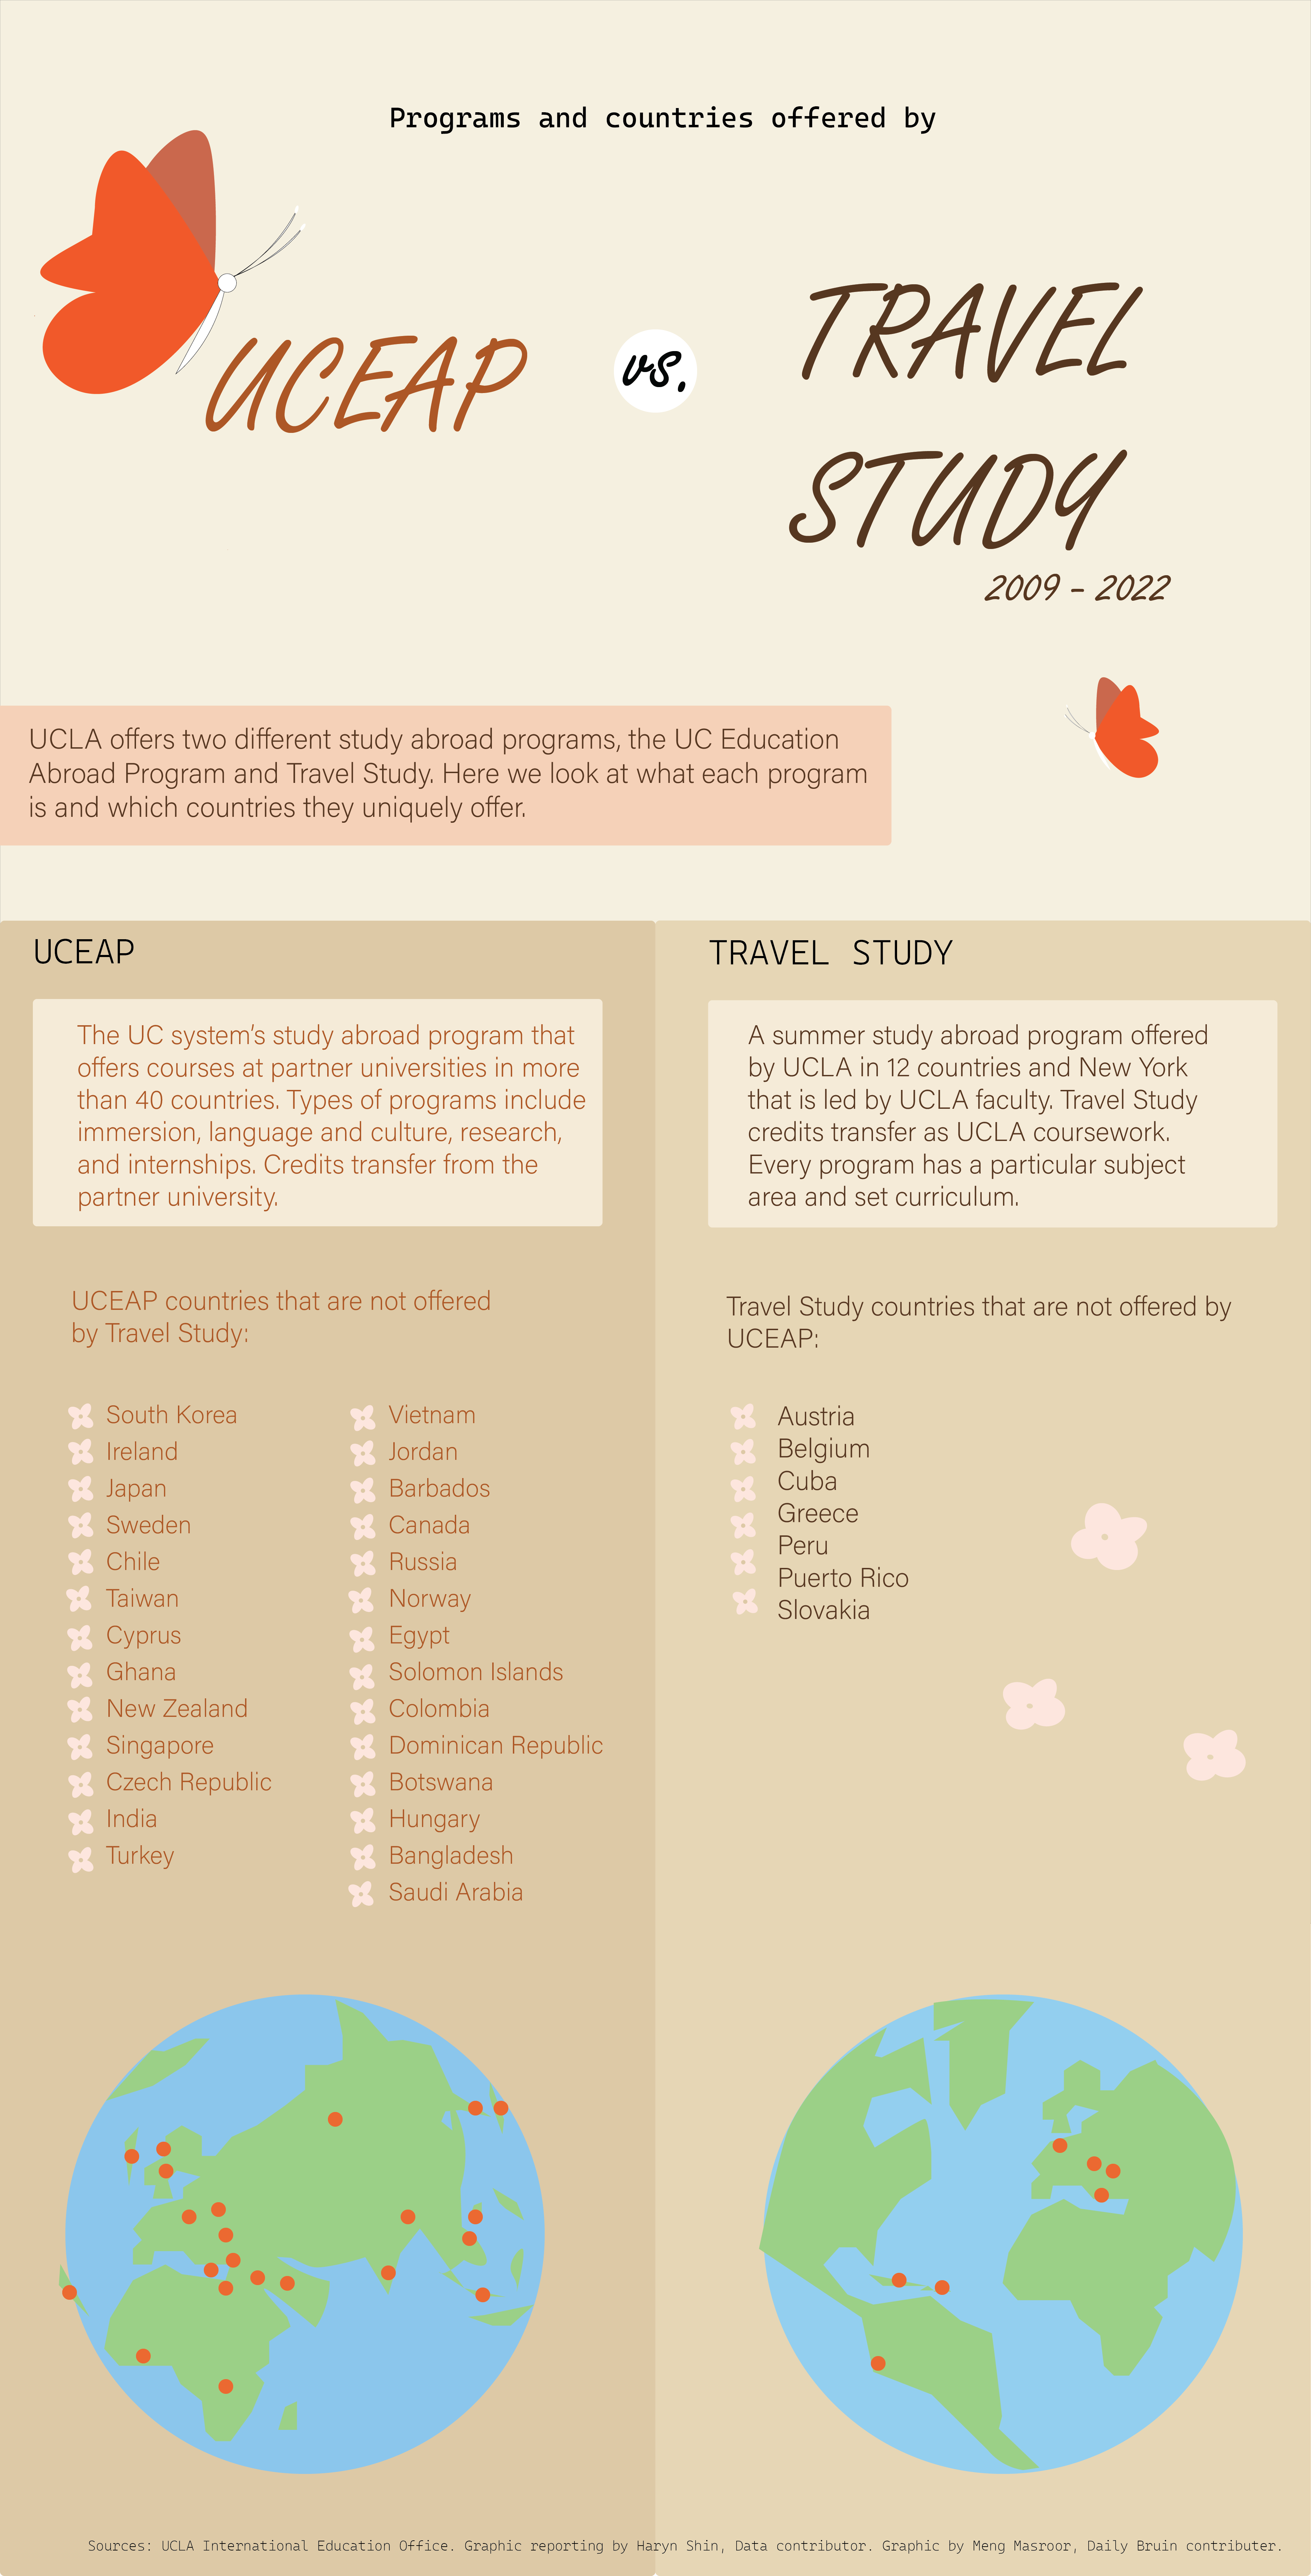 Graphic: Programs / Countries offered by UCEAP vs. Travel Study 2009 - 2022. UCLA offers two different study abroad programs, UCEAP and Travel Study. Here we look at what each program is and which countries they offer uniquely.UCEAP (University of California Education Abroad Program): The UC system’s study abroad program that offers courses at partner universities in over 40 countries. Types of programs include immersion, language and culture, research and internships. Credits transfer from the partner university. UCEAP countries not offered by travel study: South Korea, Ireland, Japan, Sweden, Chile, Taiwan, Cyprus, Ghana, New Zealand, Singapore, Czech Republic, India, Turkey, Vietnam, Jordan, Barbados, Canada, Russia, Norway, Egypt, Solomon Islands, Colombia, Dominican Republic, Bostwana, Hungary, Bangladesh, Saudi Arabia. Travel Study: A summer study abroad program offered by UCLA in 12 countries and New York that is led by UCLA faculty. Credits transfer as UCLA coursework. Every program has a particular subject area and set curriculum. Travel Study Countries not offered by UCEAP: Austria, Belgium, Cuba, Greece, Peru, Puerto Rico, Slovakia